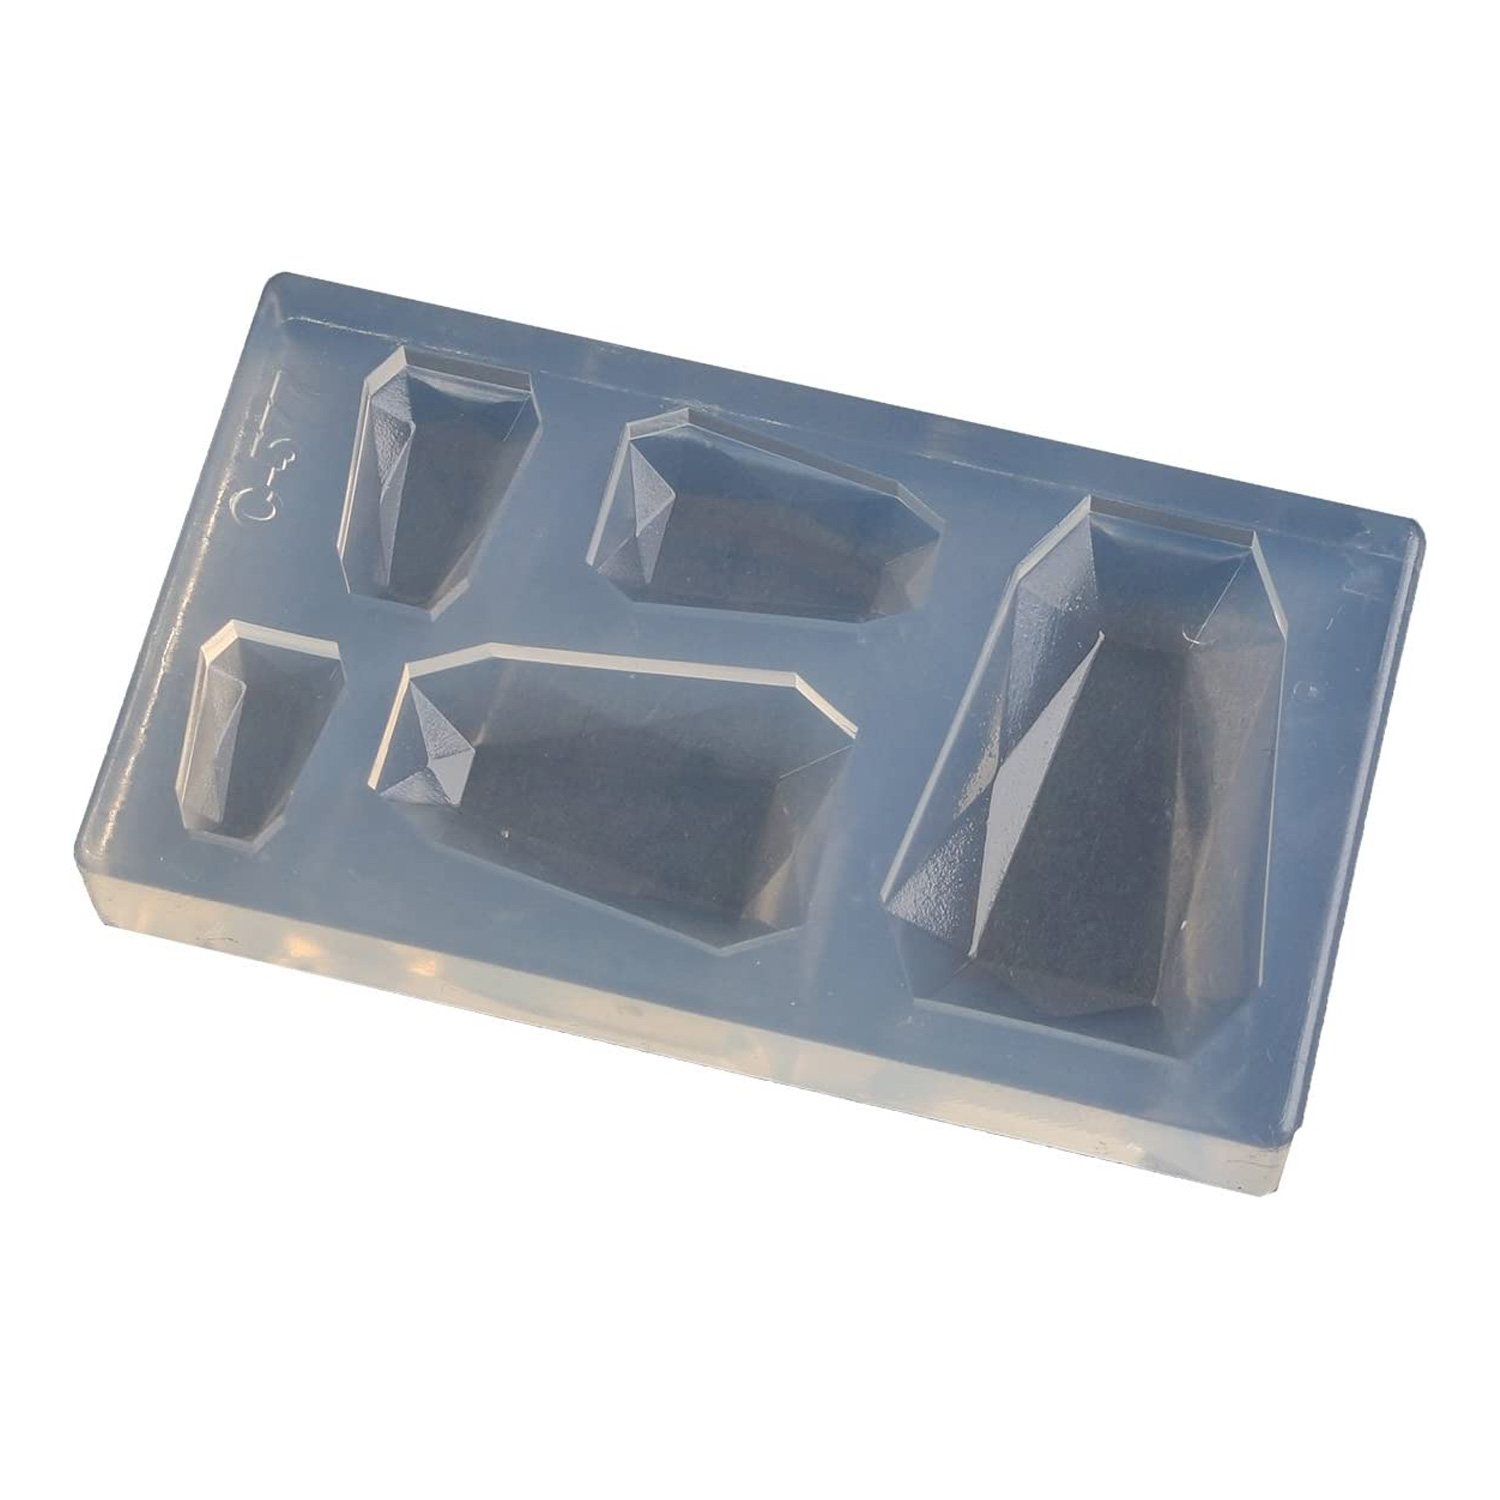 KAM-REJ-577  Resin Crafting Silicone Mold  (pcs)